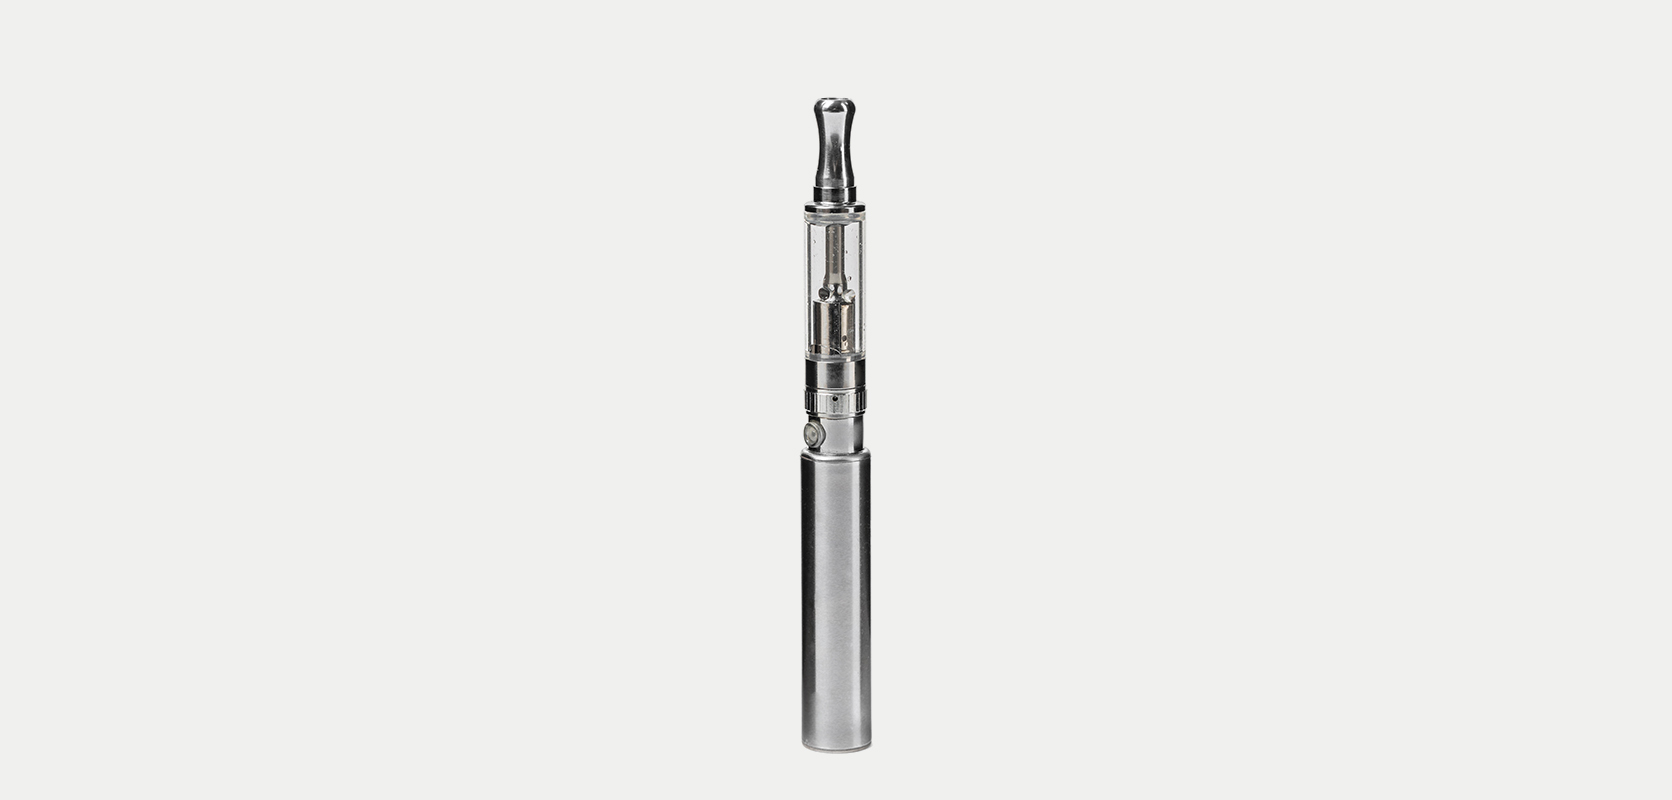 Dab Pen for sale at Low Price Bud weed dispensary. how much are dab pens in Canada? weed vape and weed pen for sale.